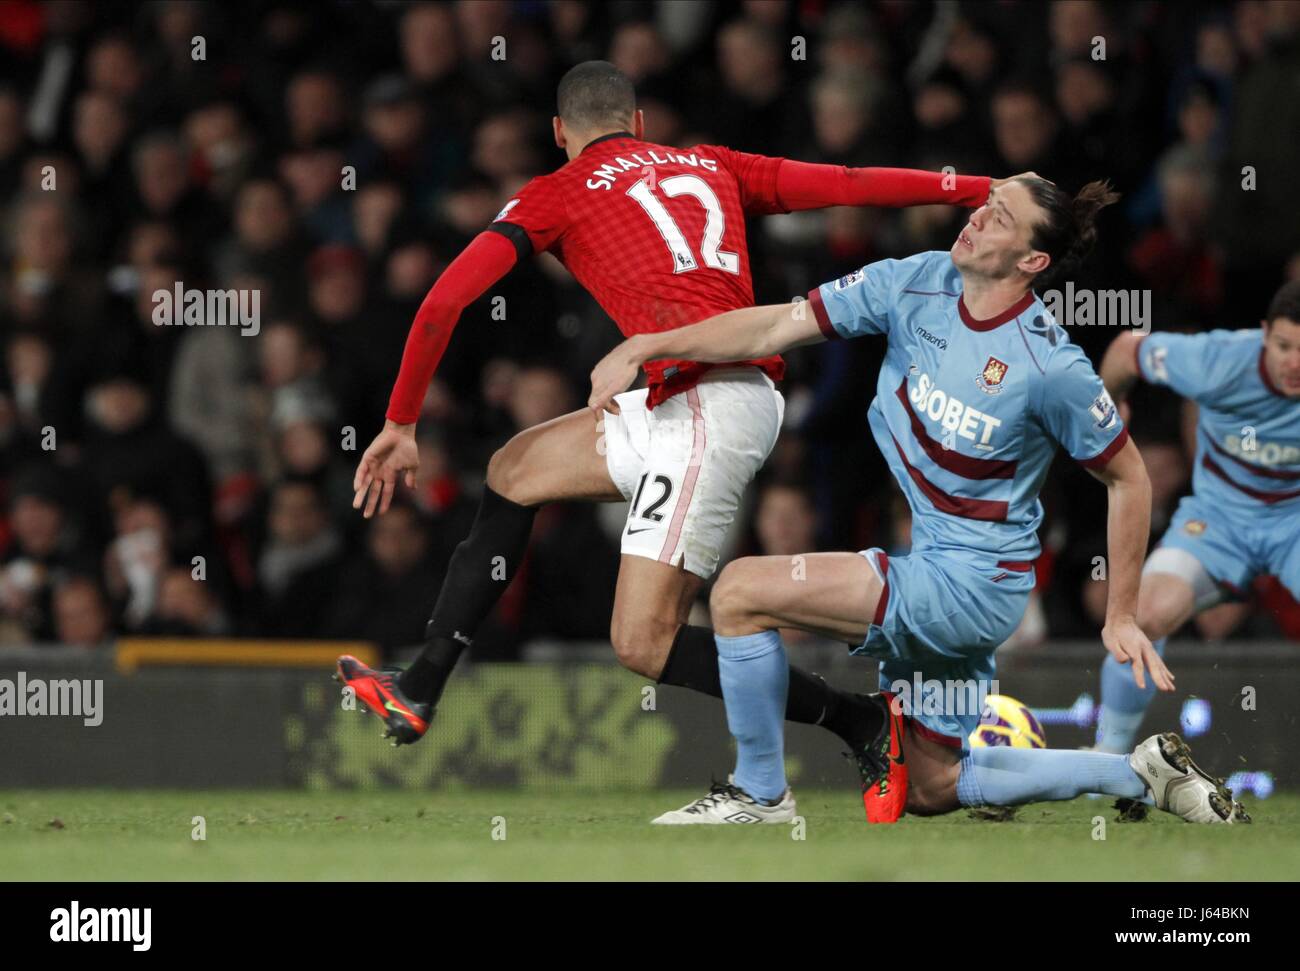 CHRIS SMALLING CATCHES ANDY CA MANCHESTER UNITED V WEST HAM U OLD TRAFFORD MANCHESTER ENGLAND 28 November 2012 Stock Photo